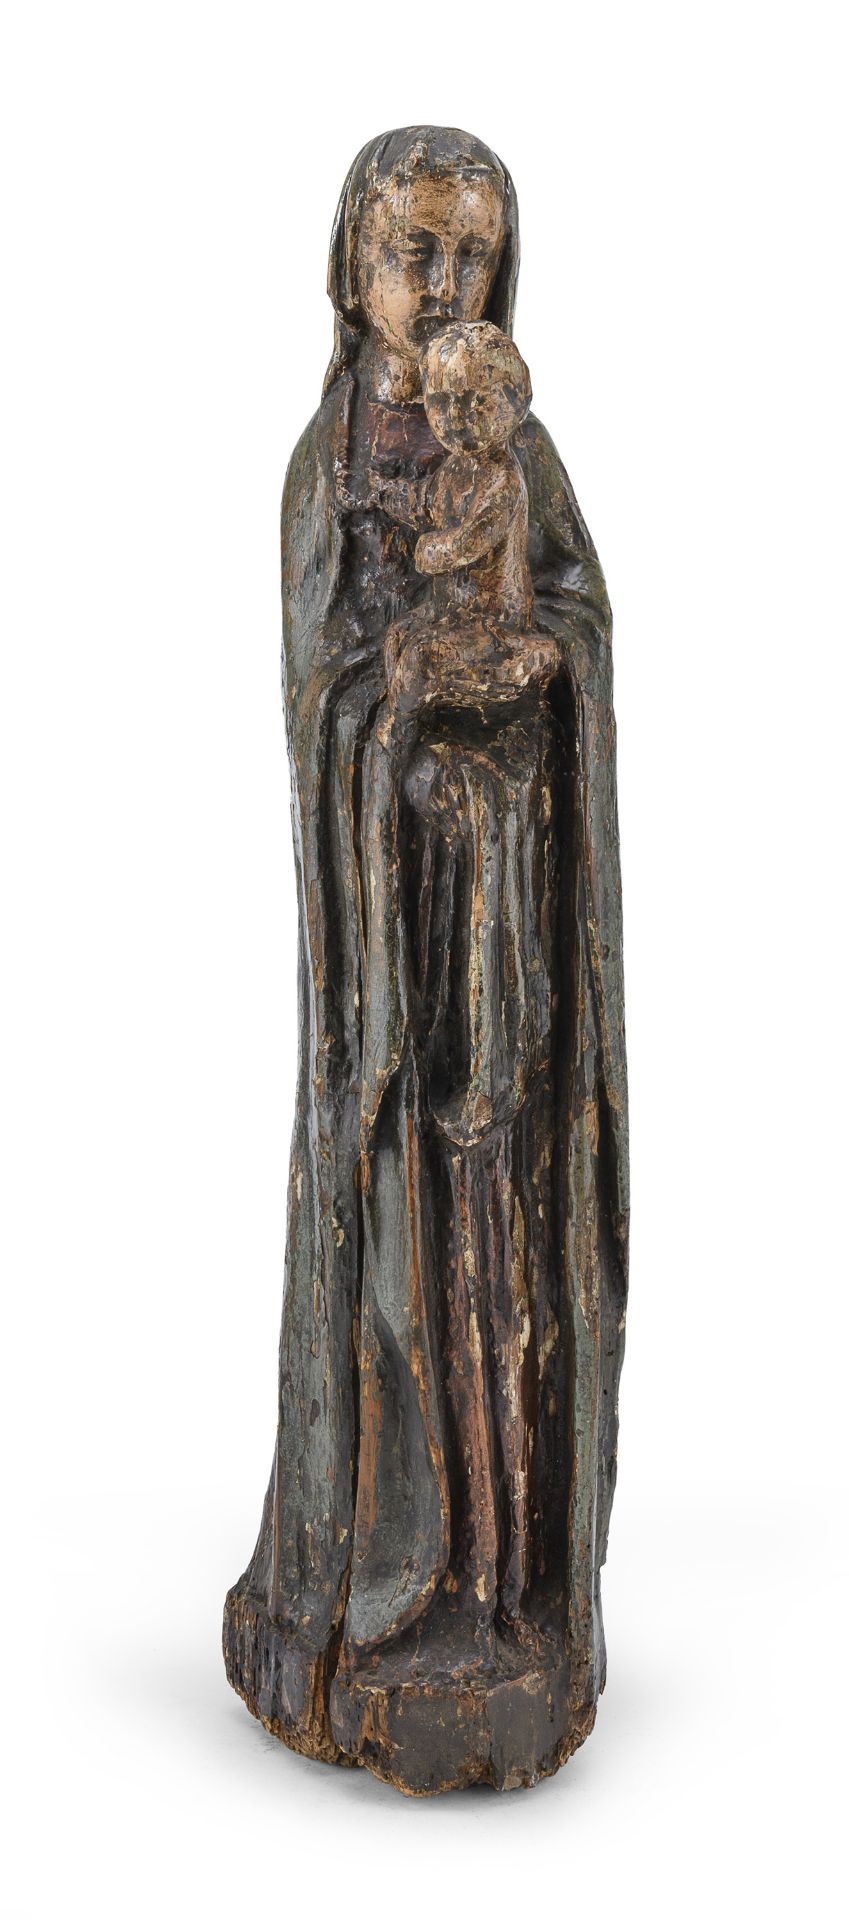 SCULPTURE OF THE VIRGIN AND CHILD CENTRAL ITALY 15TH CENTURY